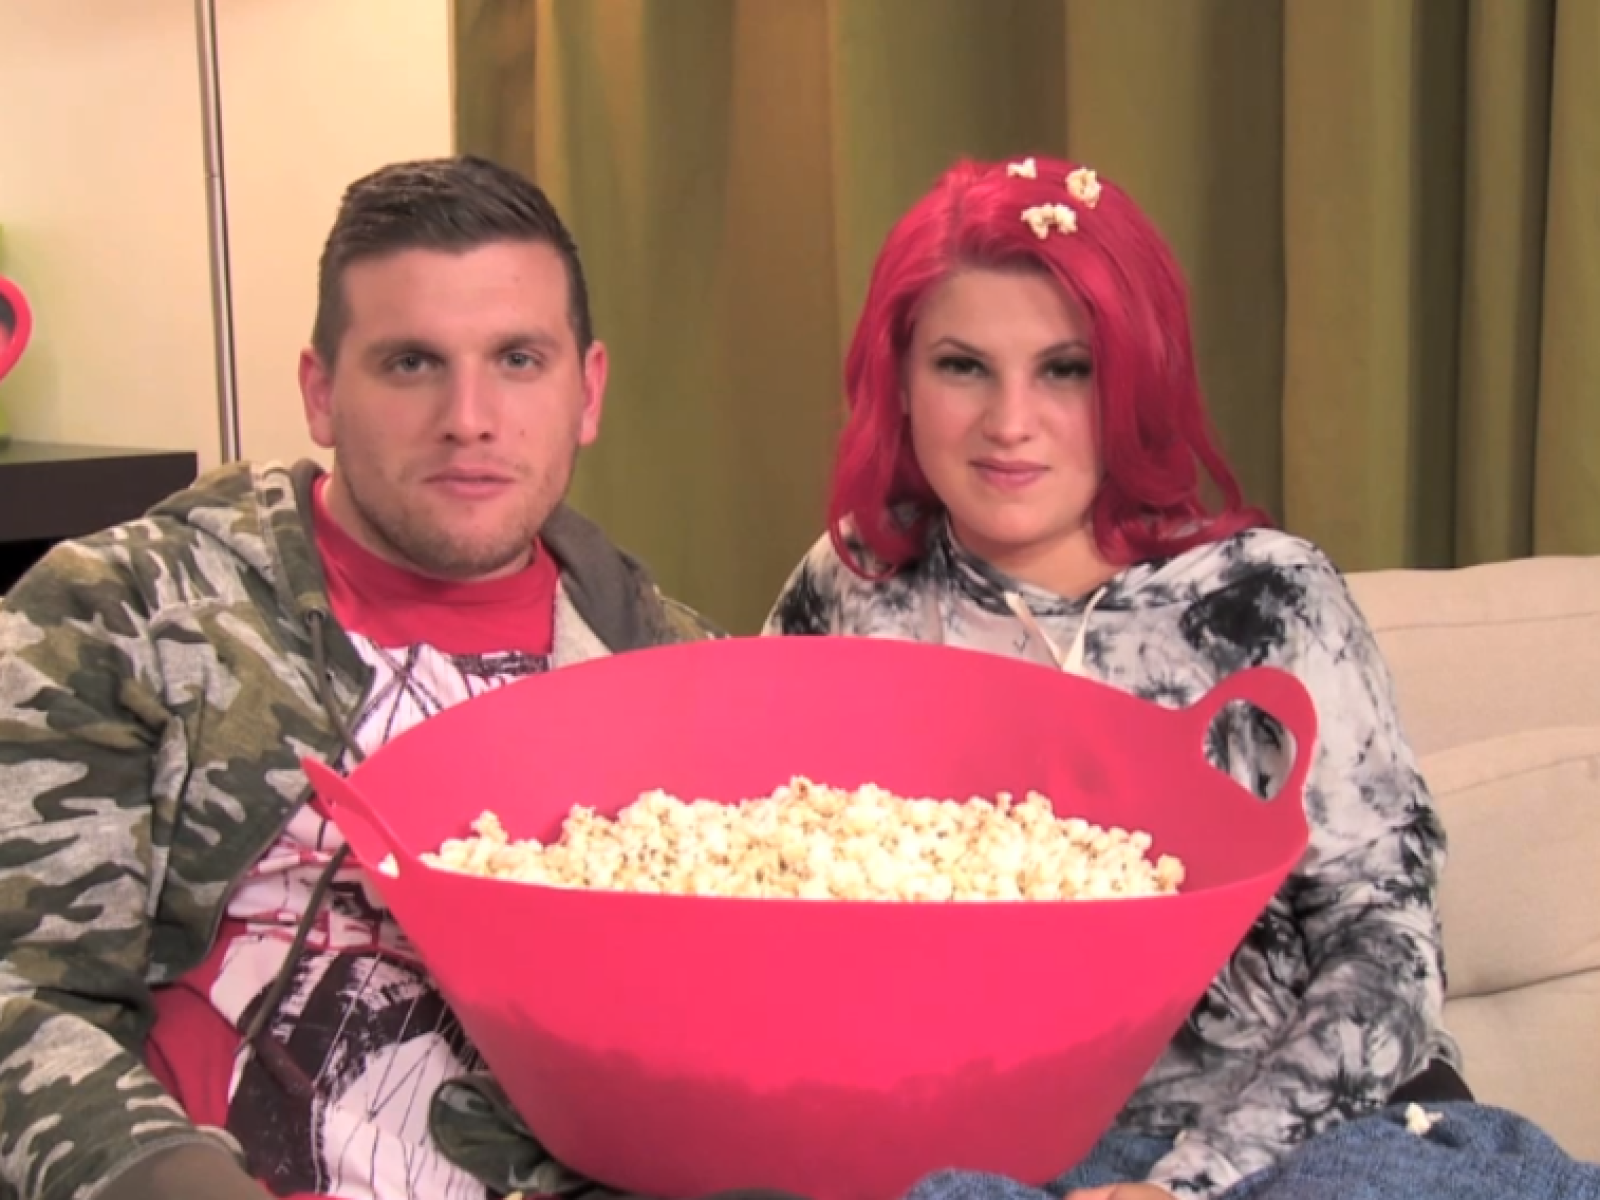 Chris Distefano Dated Carly Aquilino In The Past